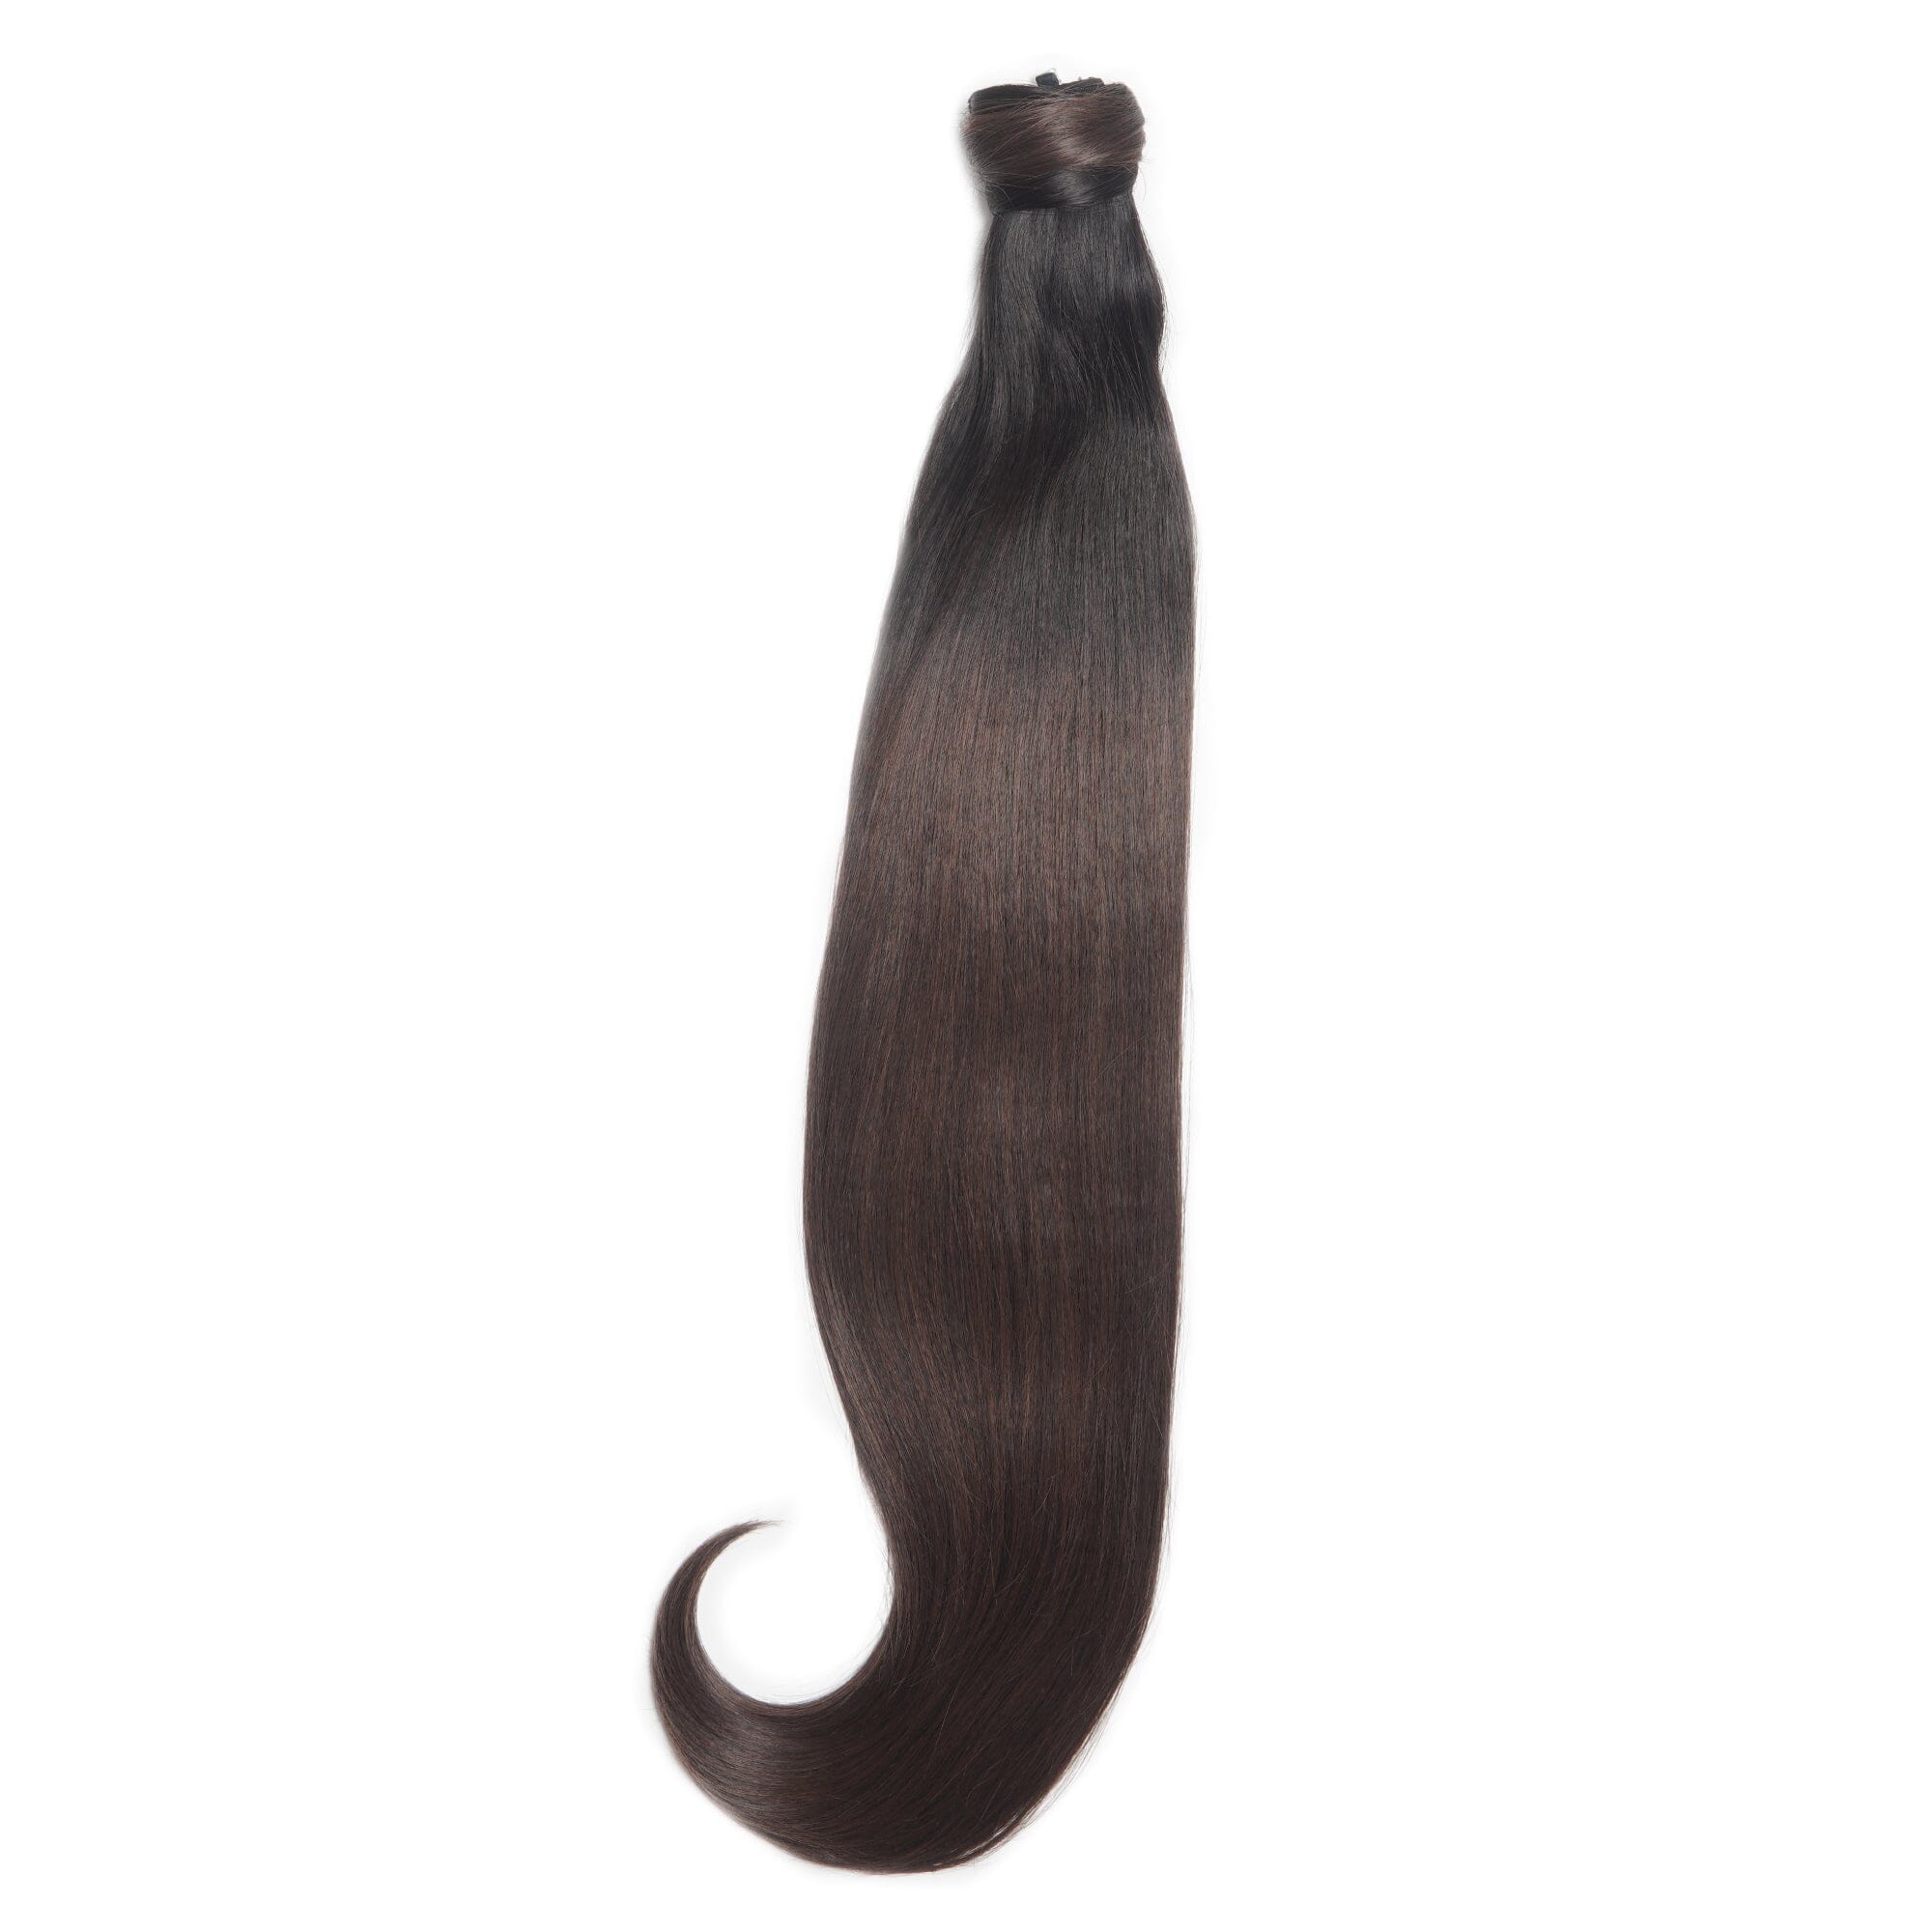 Long Clip-In Ponytails (22" - 30") Clip In Ponytail Easilocks 26" Silky Straight Bouncy Ponytail Dark Brown Ombre 